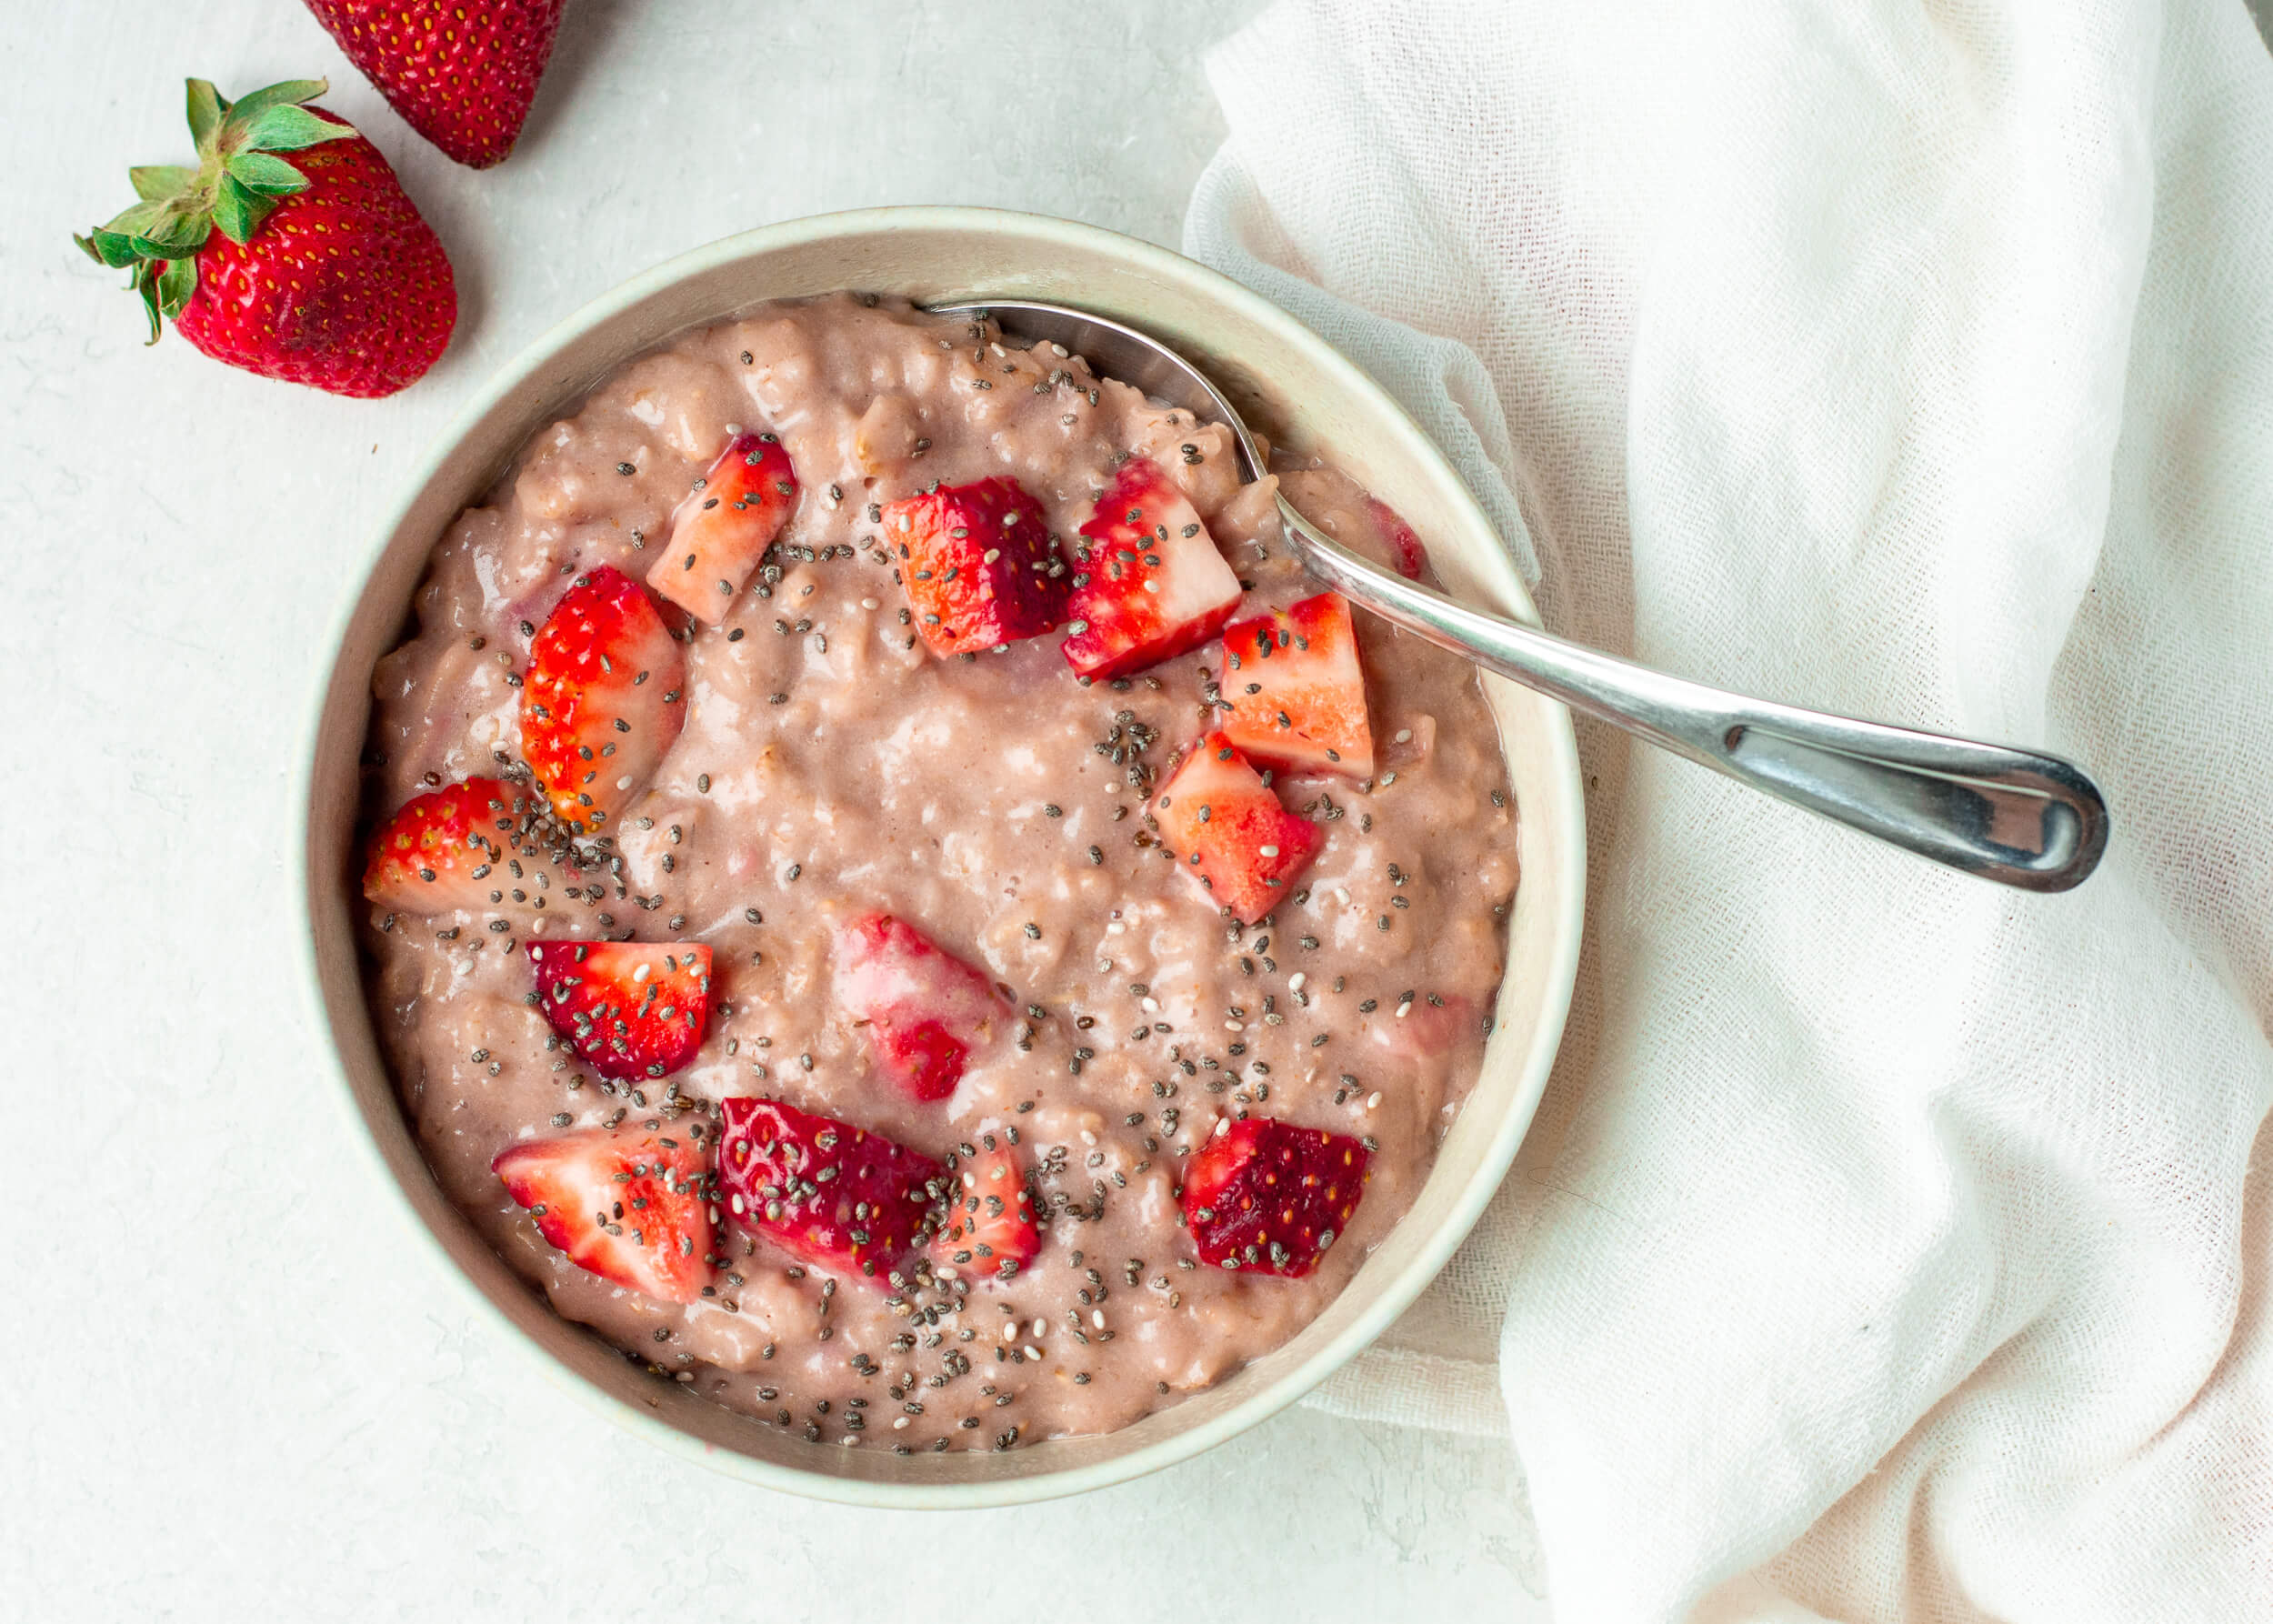 20 Meal Ideas to Help Clients Manage Arthritis: Strawberries & Cream Oats